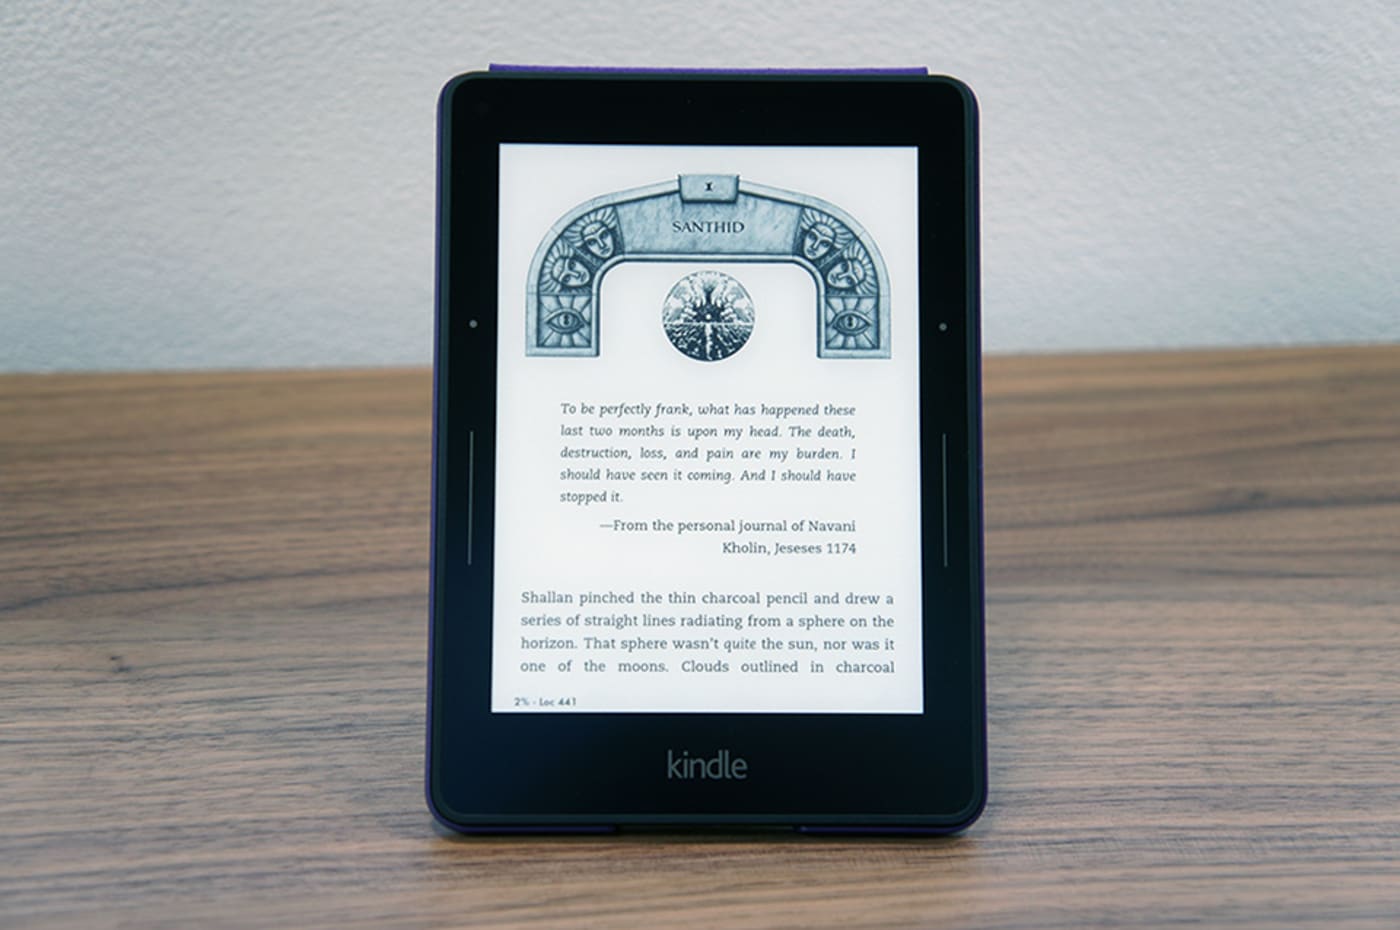 WSJ: Next Amazon Kindle comes with rechargeable cases